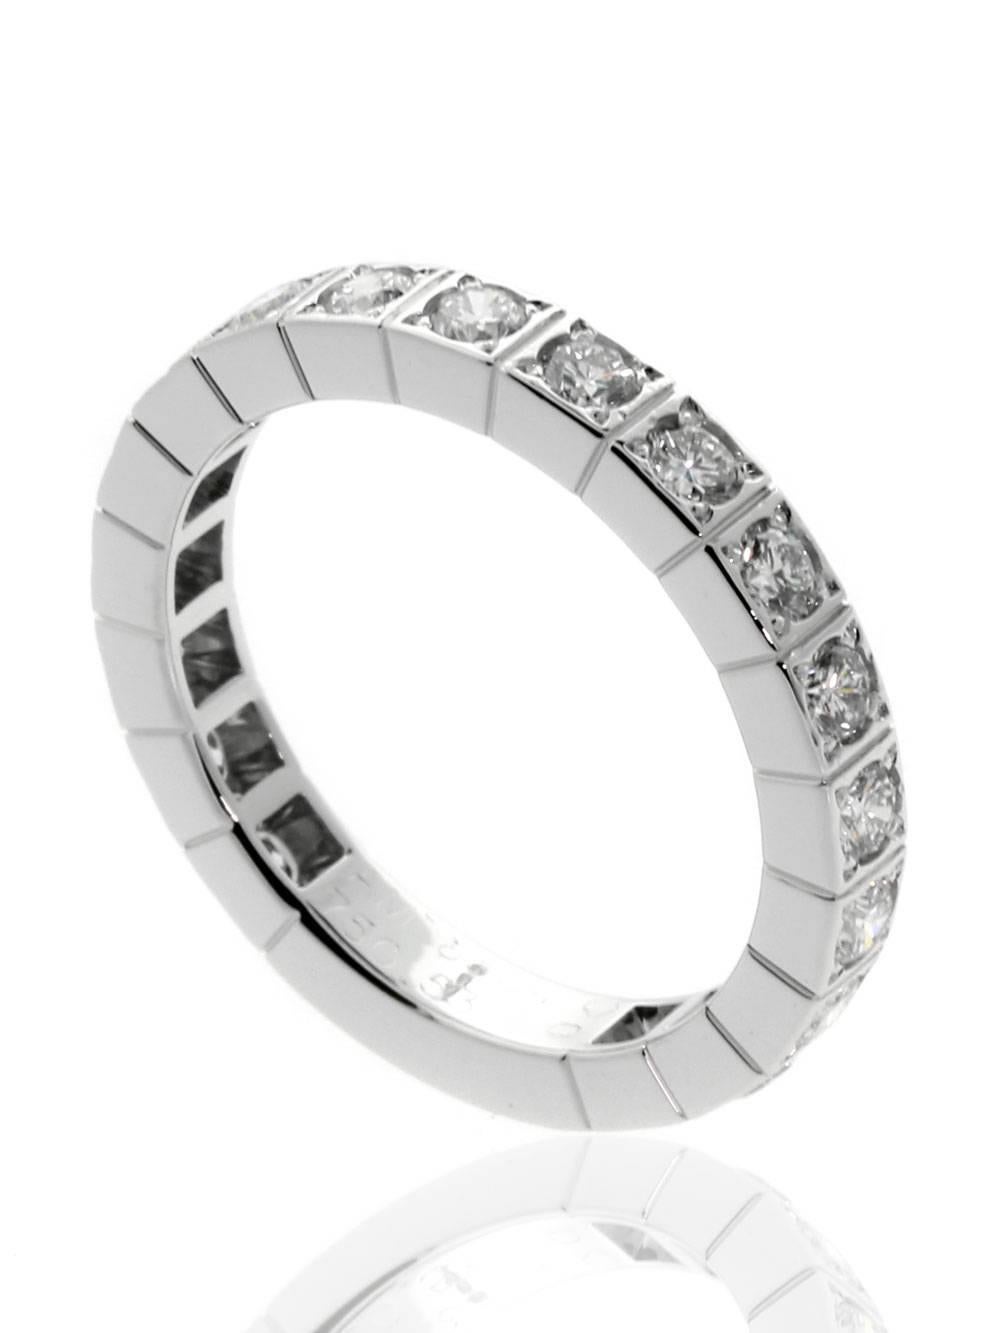 Cartier continue their proud legacy with this 18k White Gold ring from their Lanieres collection. With a sleek, timeless design and 18 Brilliant Cut Diamonds to spice things up, this band-style ring is the culmination of centuries’ worth of